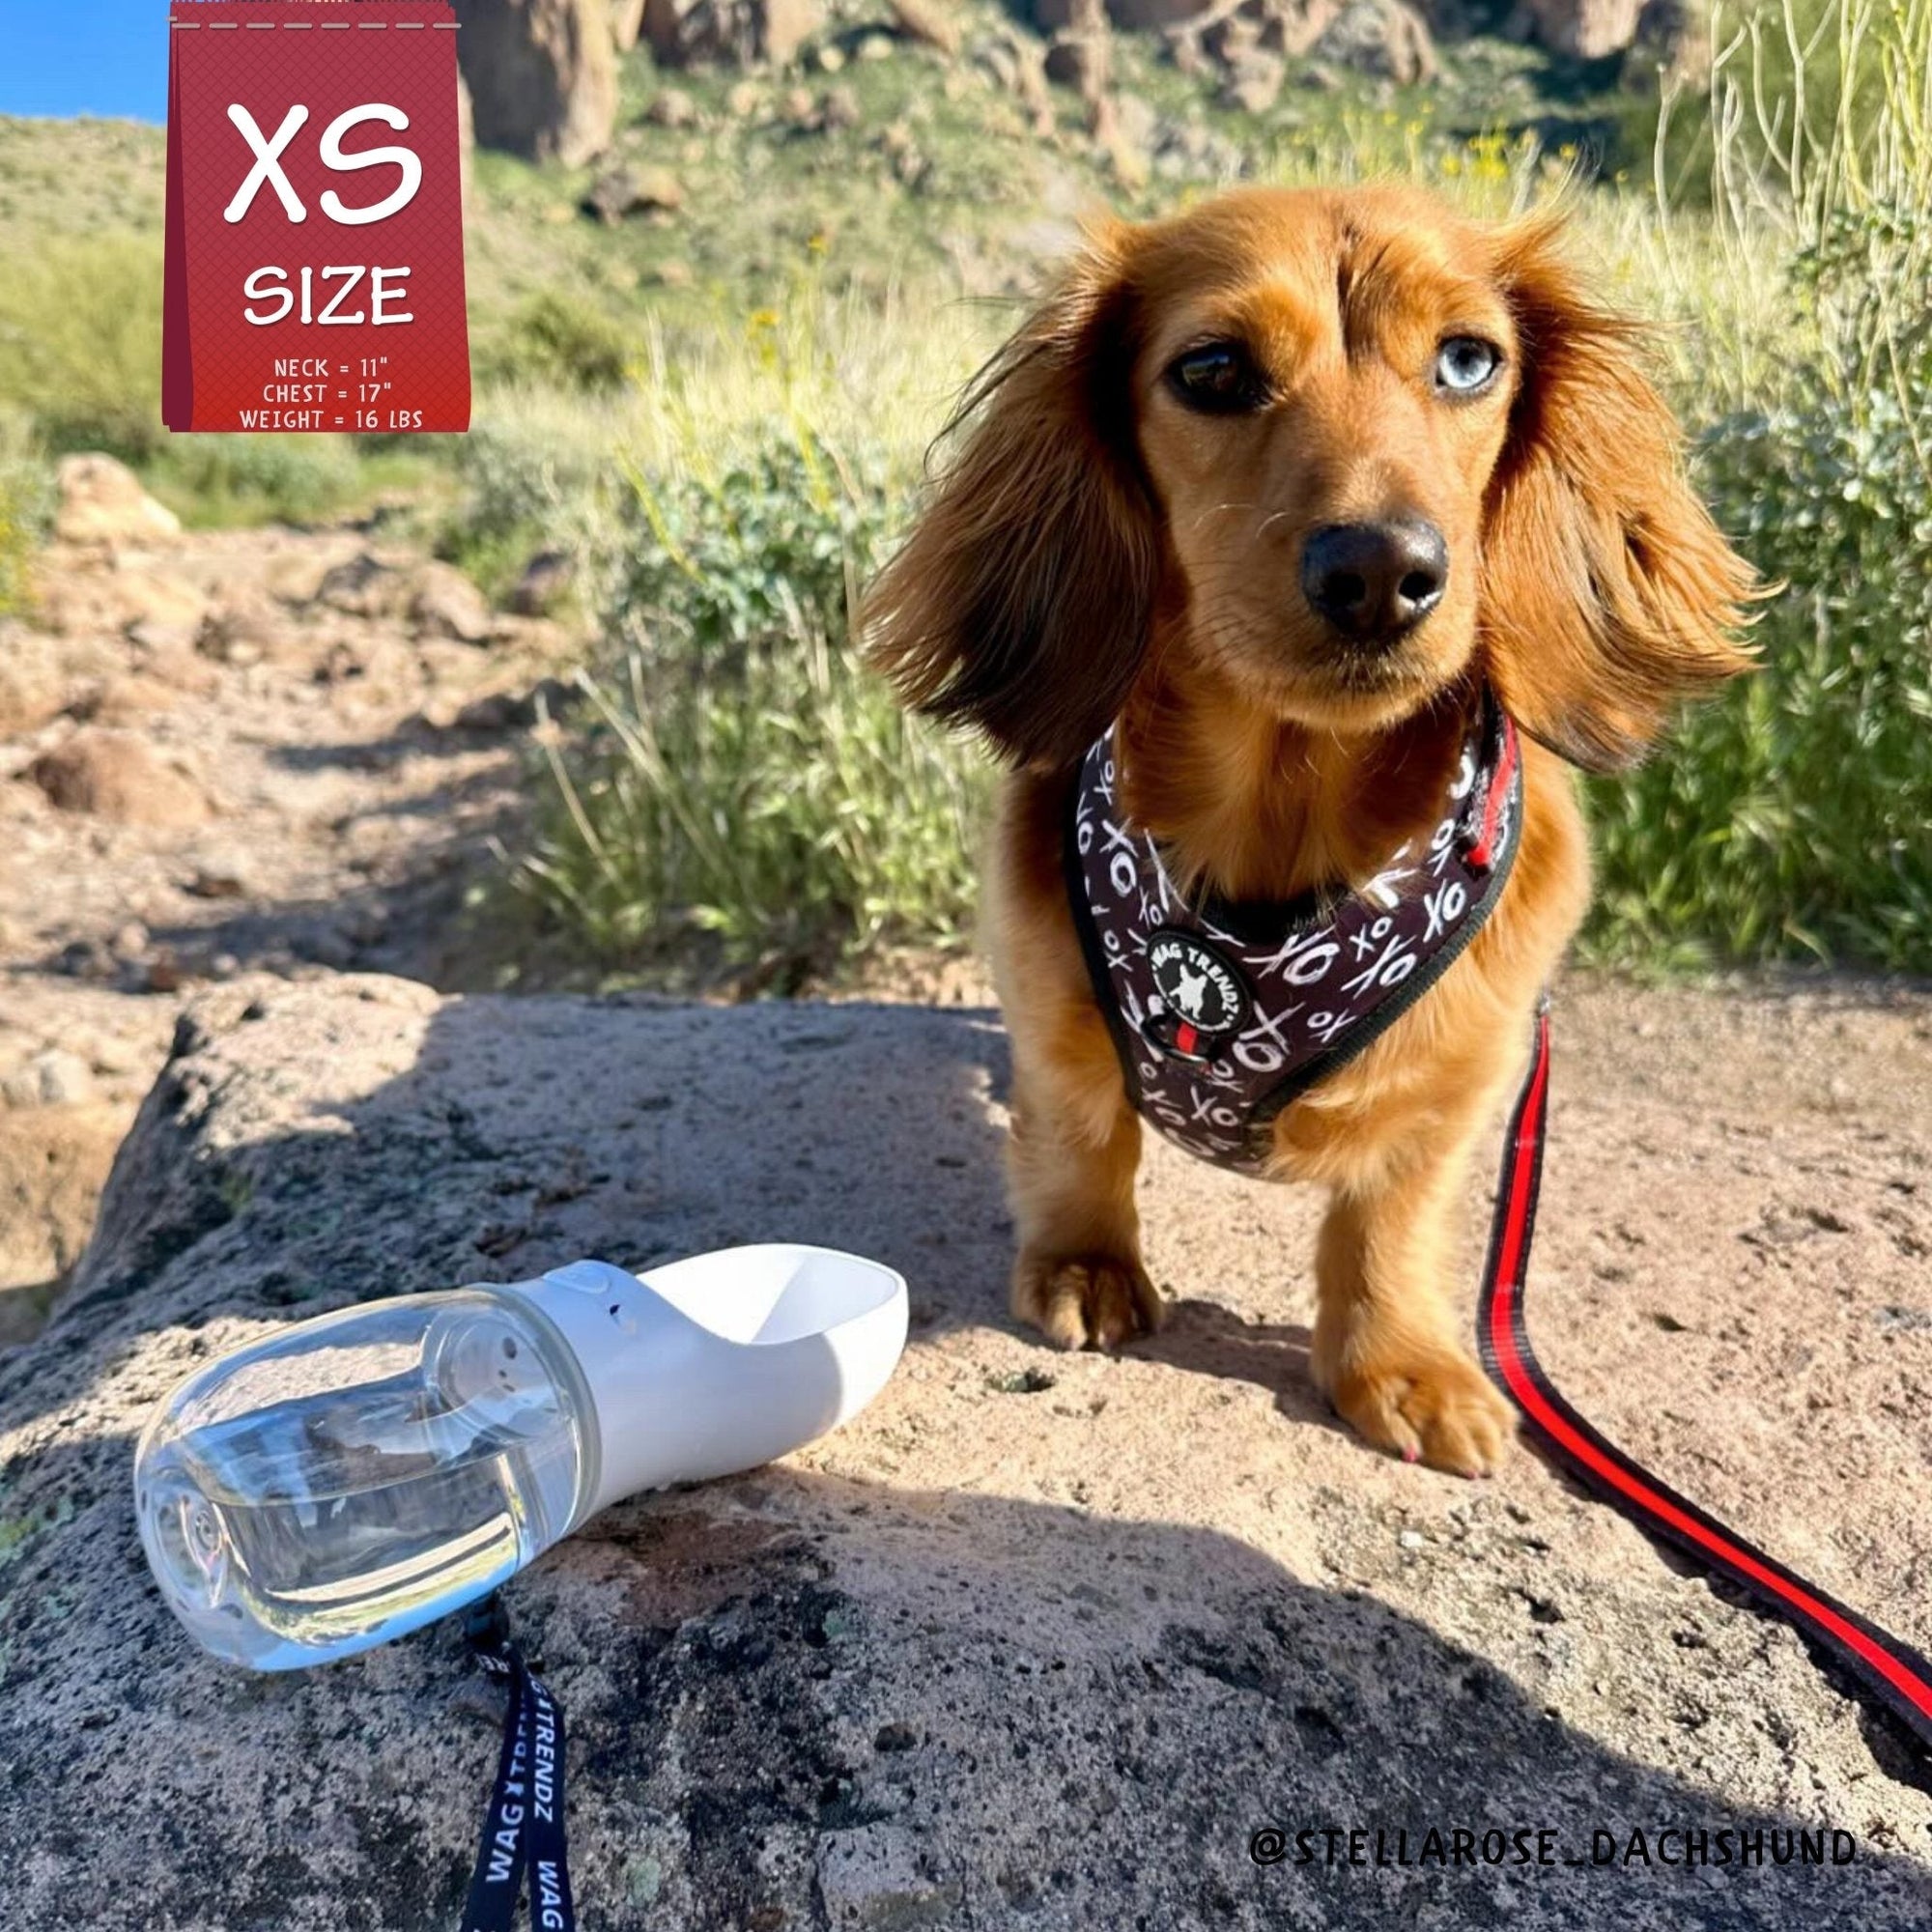 Dog Harness and Leash Set - Longhair Dachshund wearing XS Dog Adjustable Harness in black and white XO&#39;s with bold Red accents with matching Dog Leash with portable dog water bottle  - on a rock with grass behind - Wag Trendz